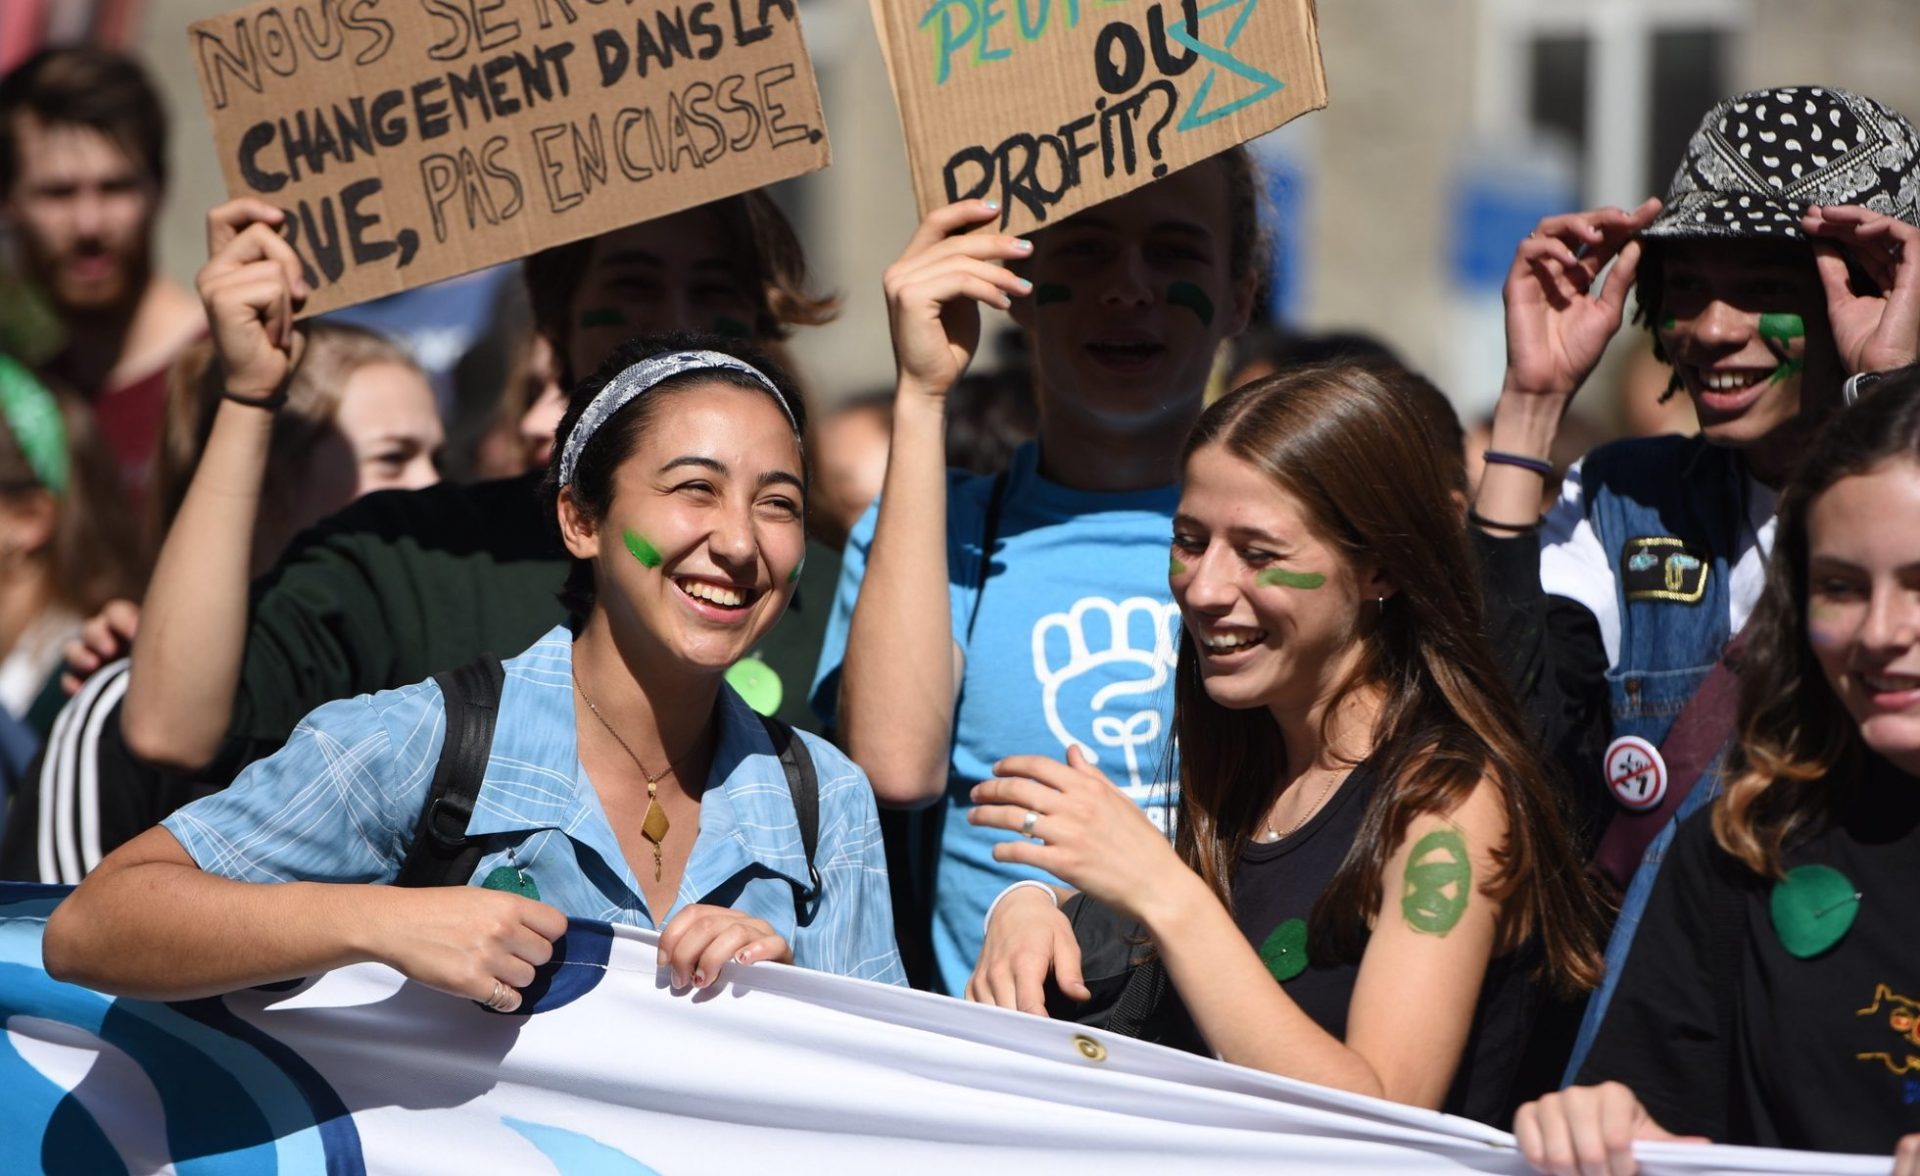 Youth behind smiling behind banner at 2019 youth climate march in Montreal